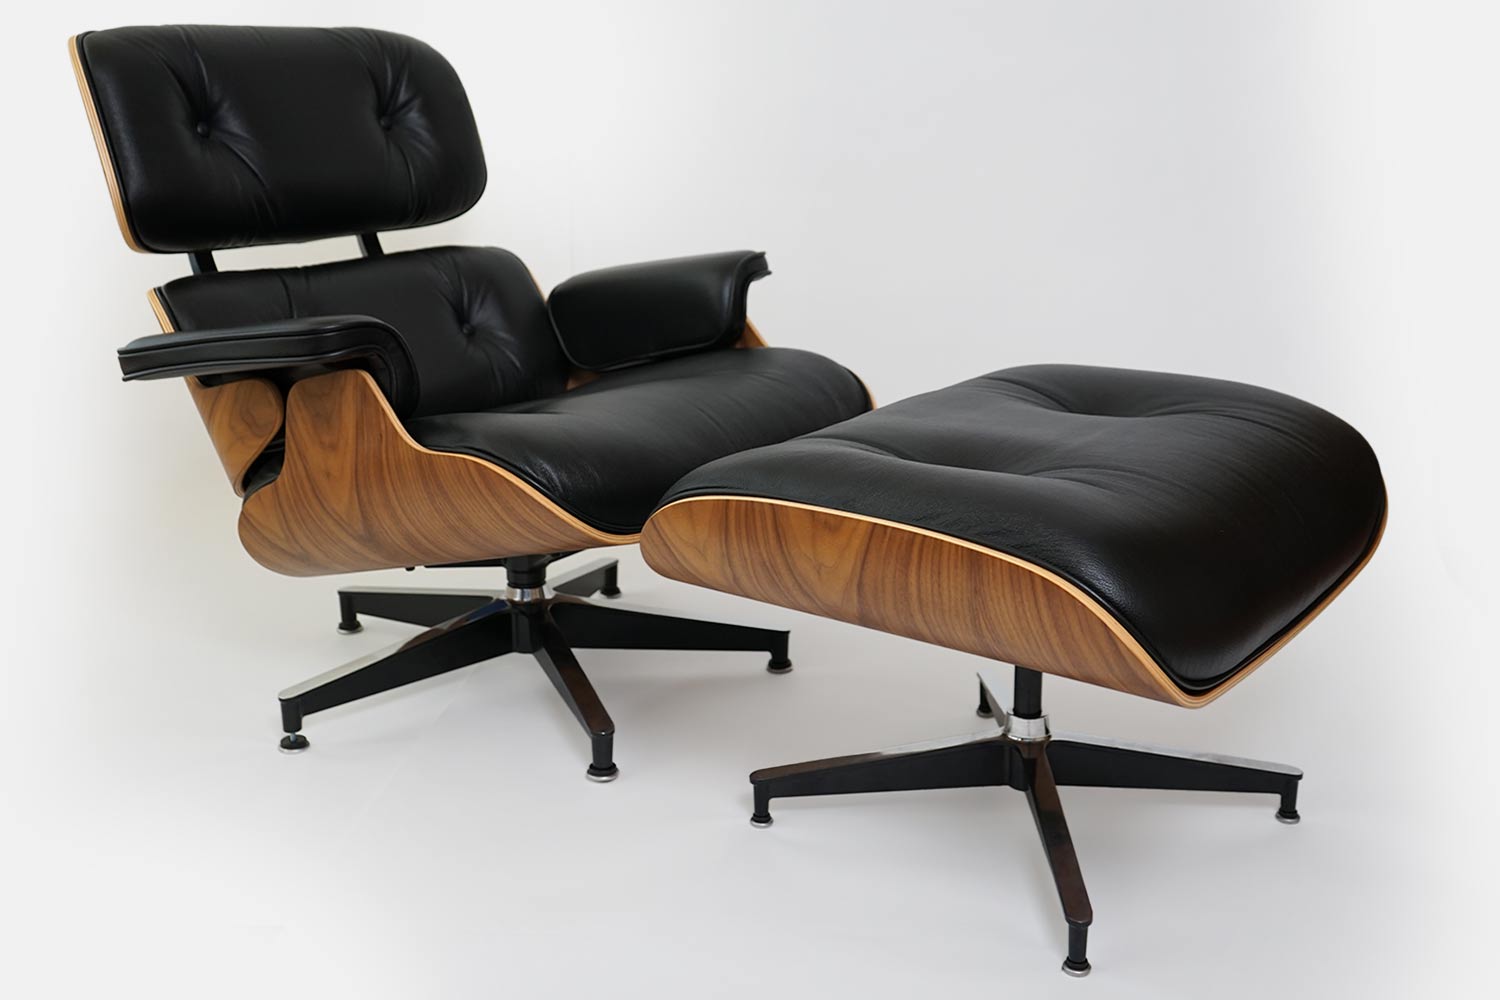 The Eames Lounge Chair and Ottoman